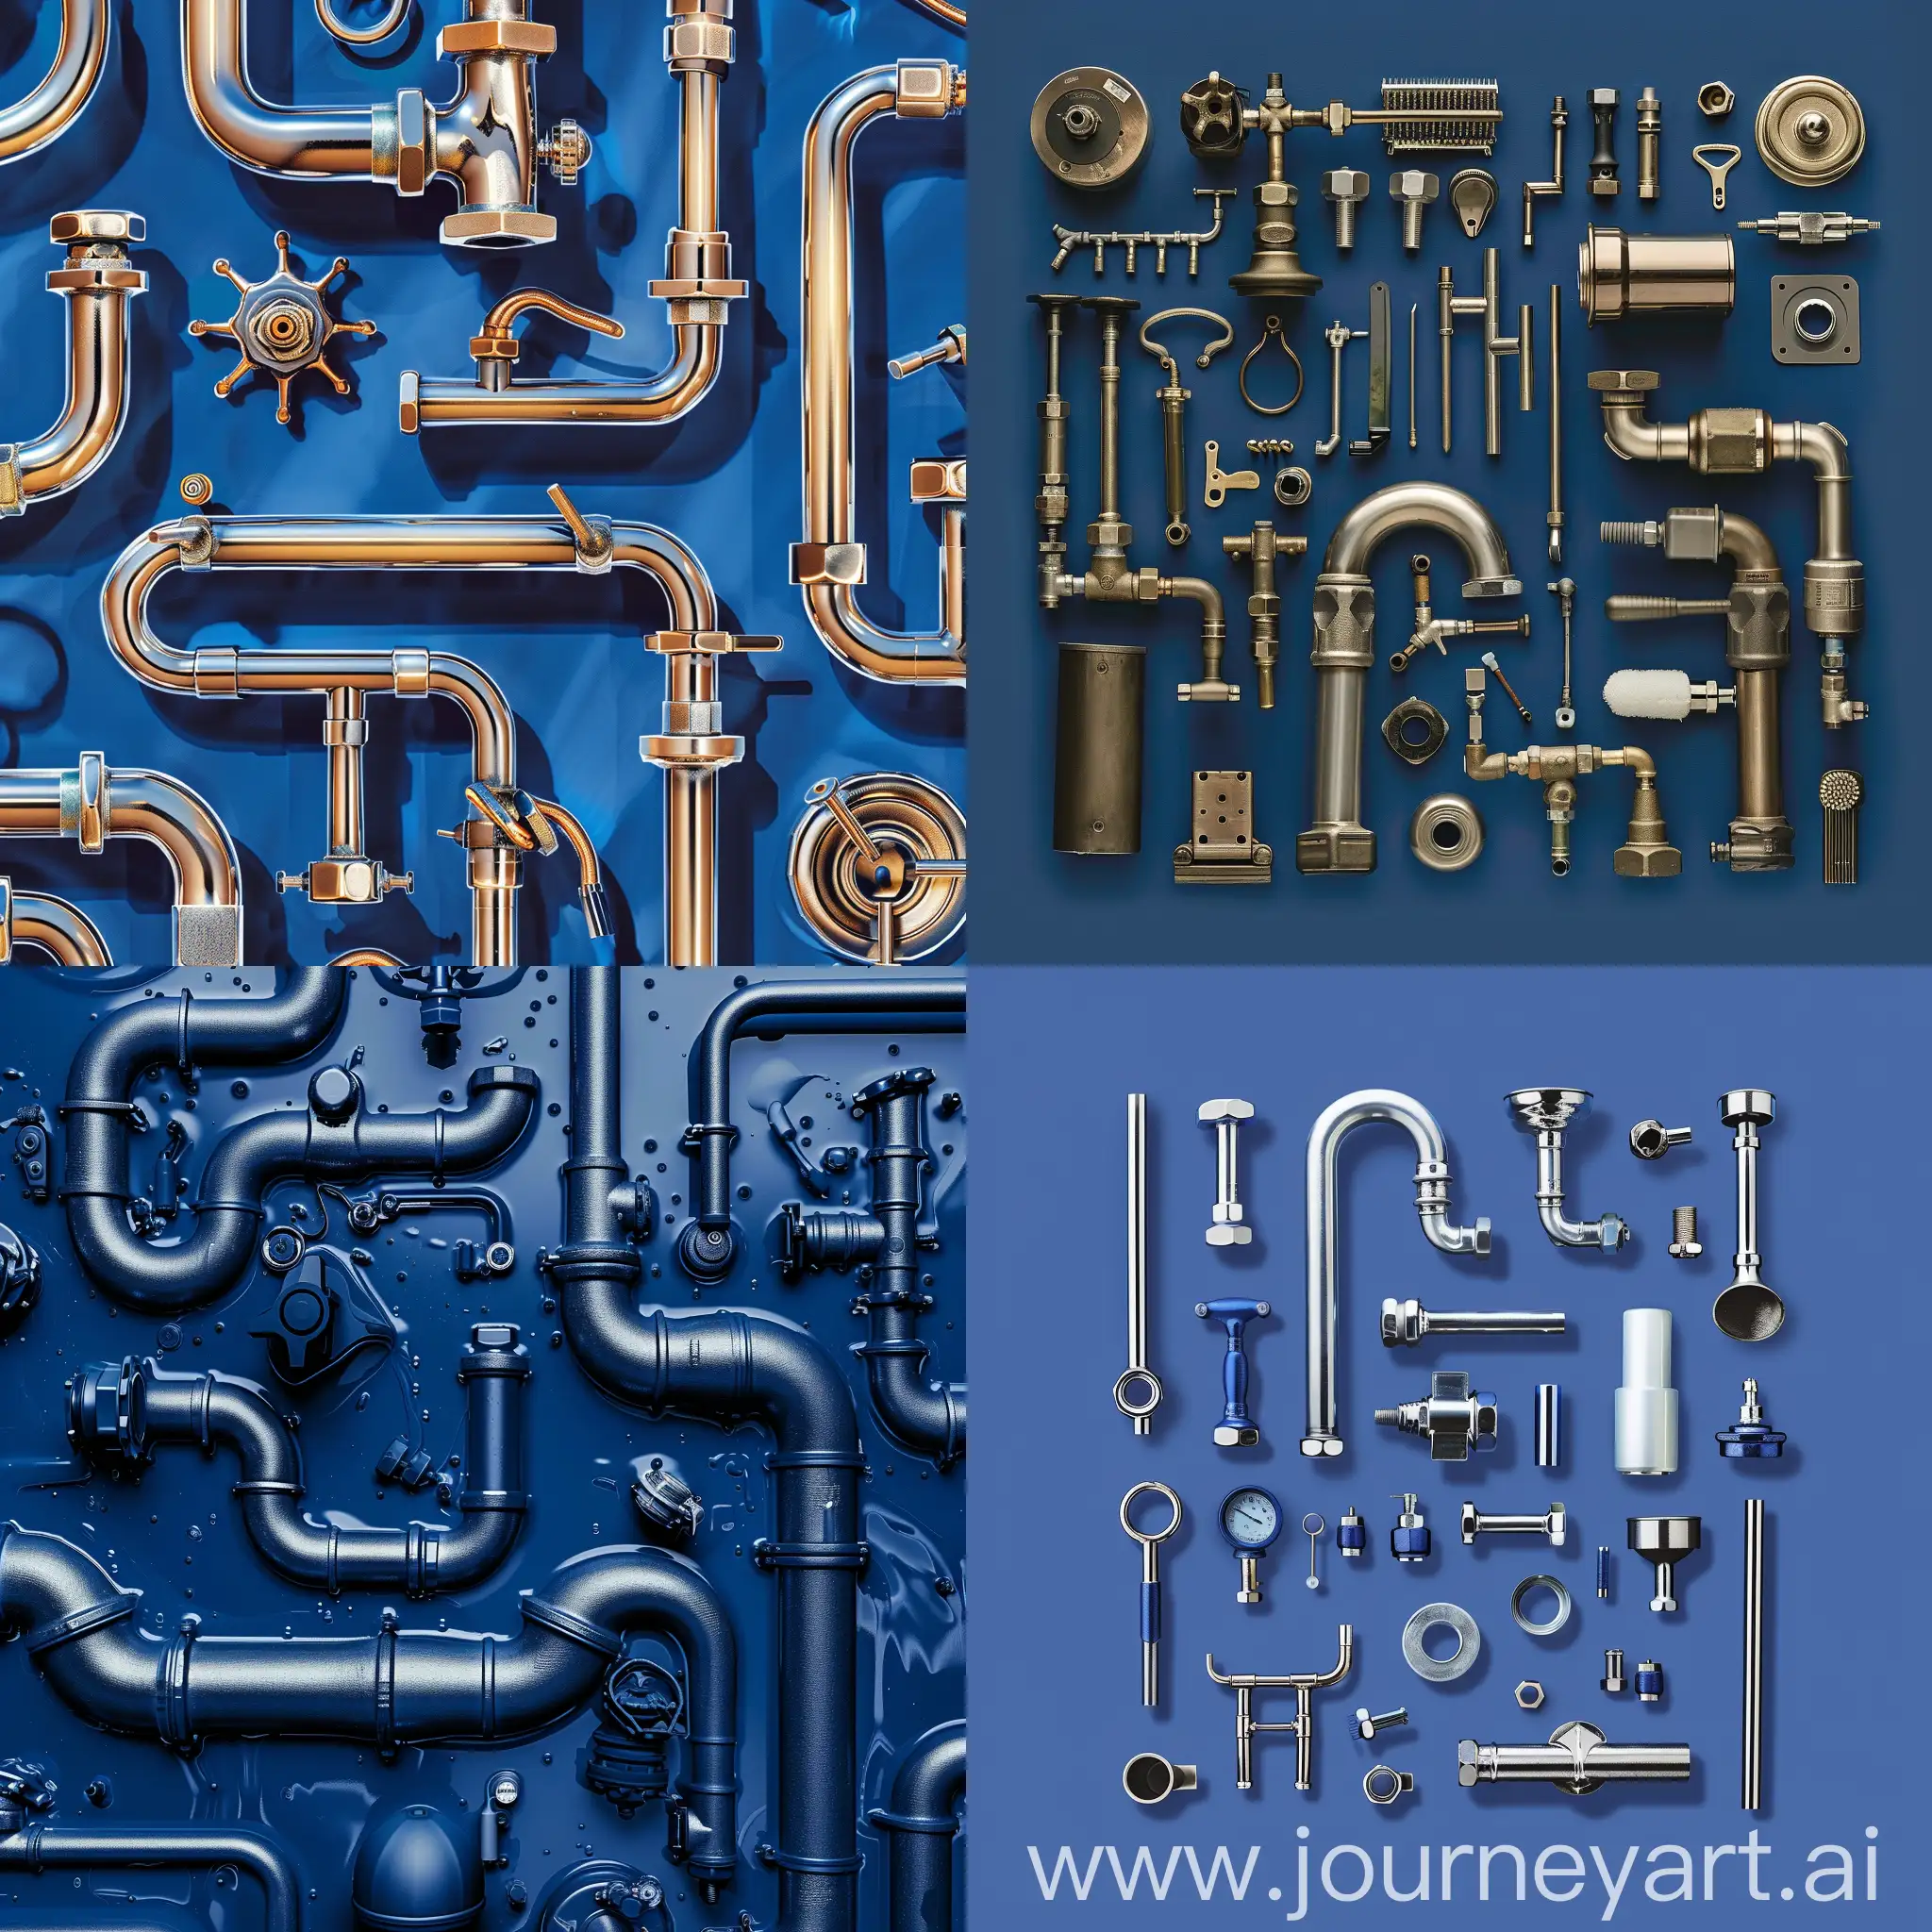 Various-Plumbing-Fixtures-on-Rich-Blue-Background-for-Catalog-Cover